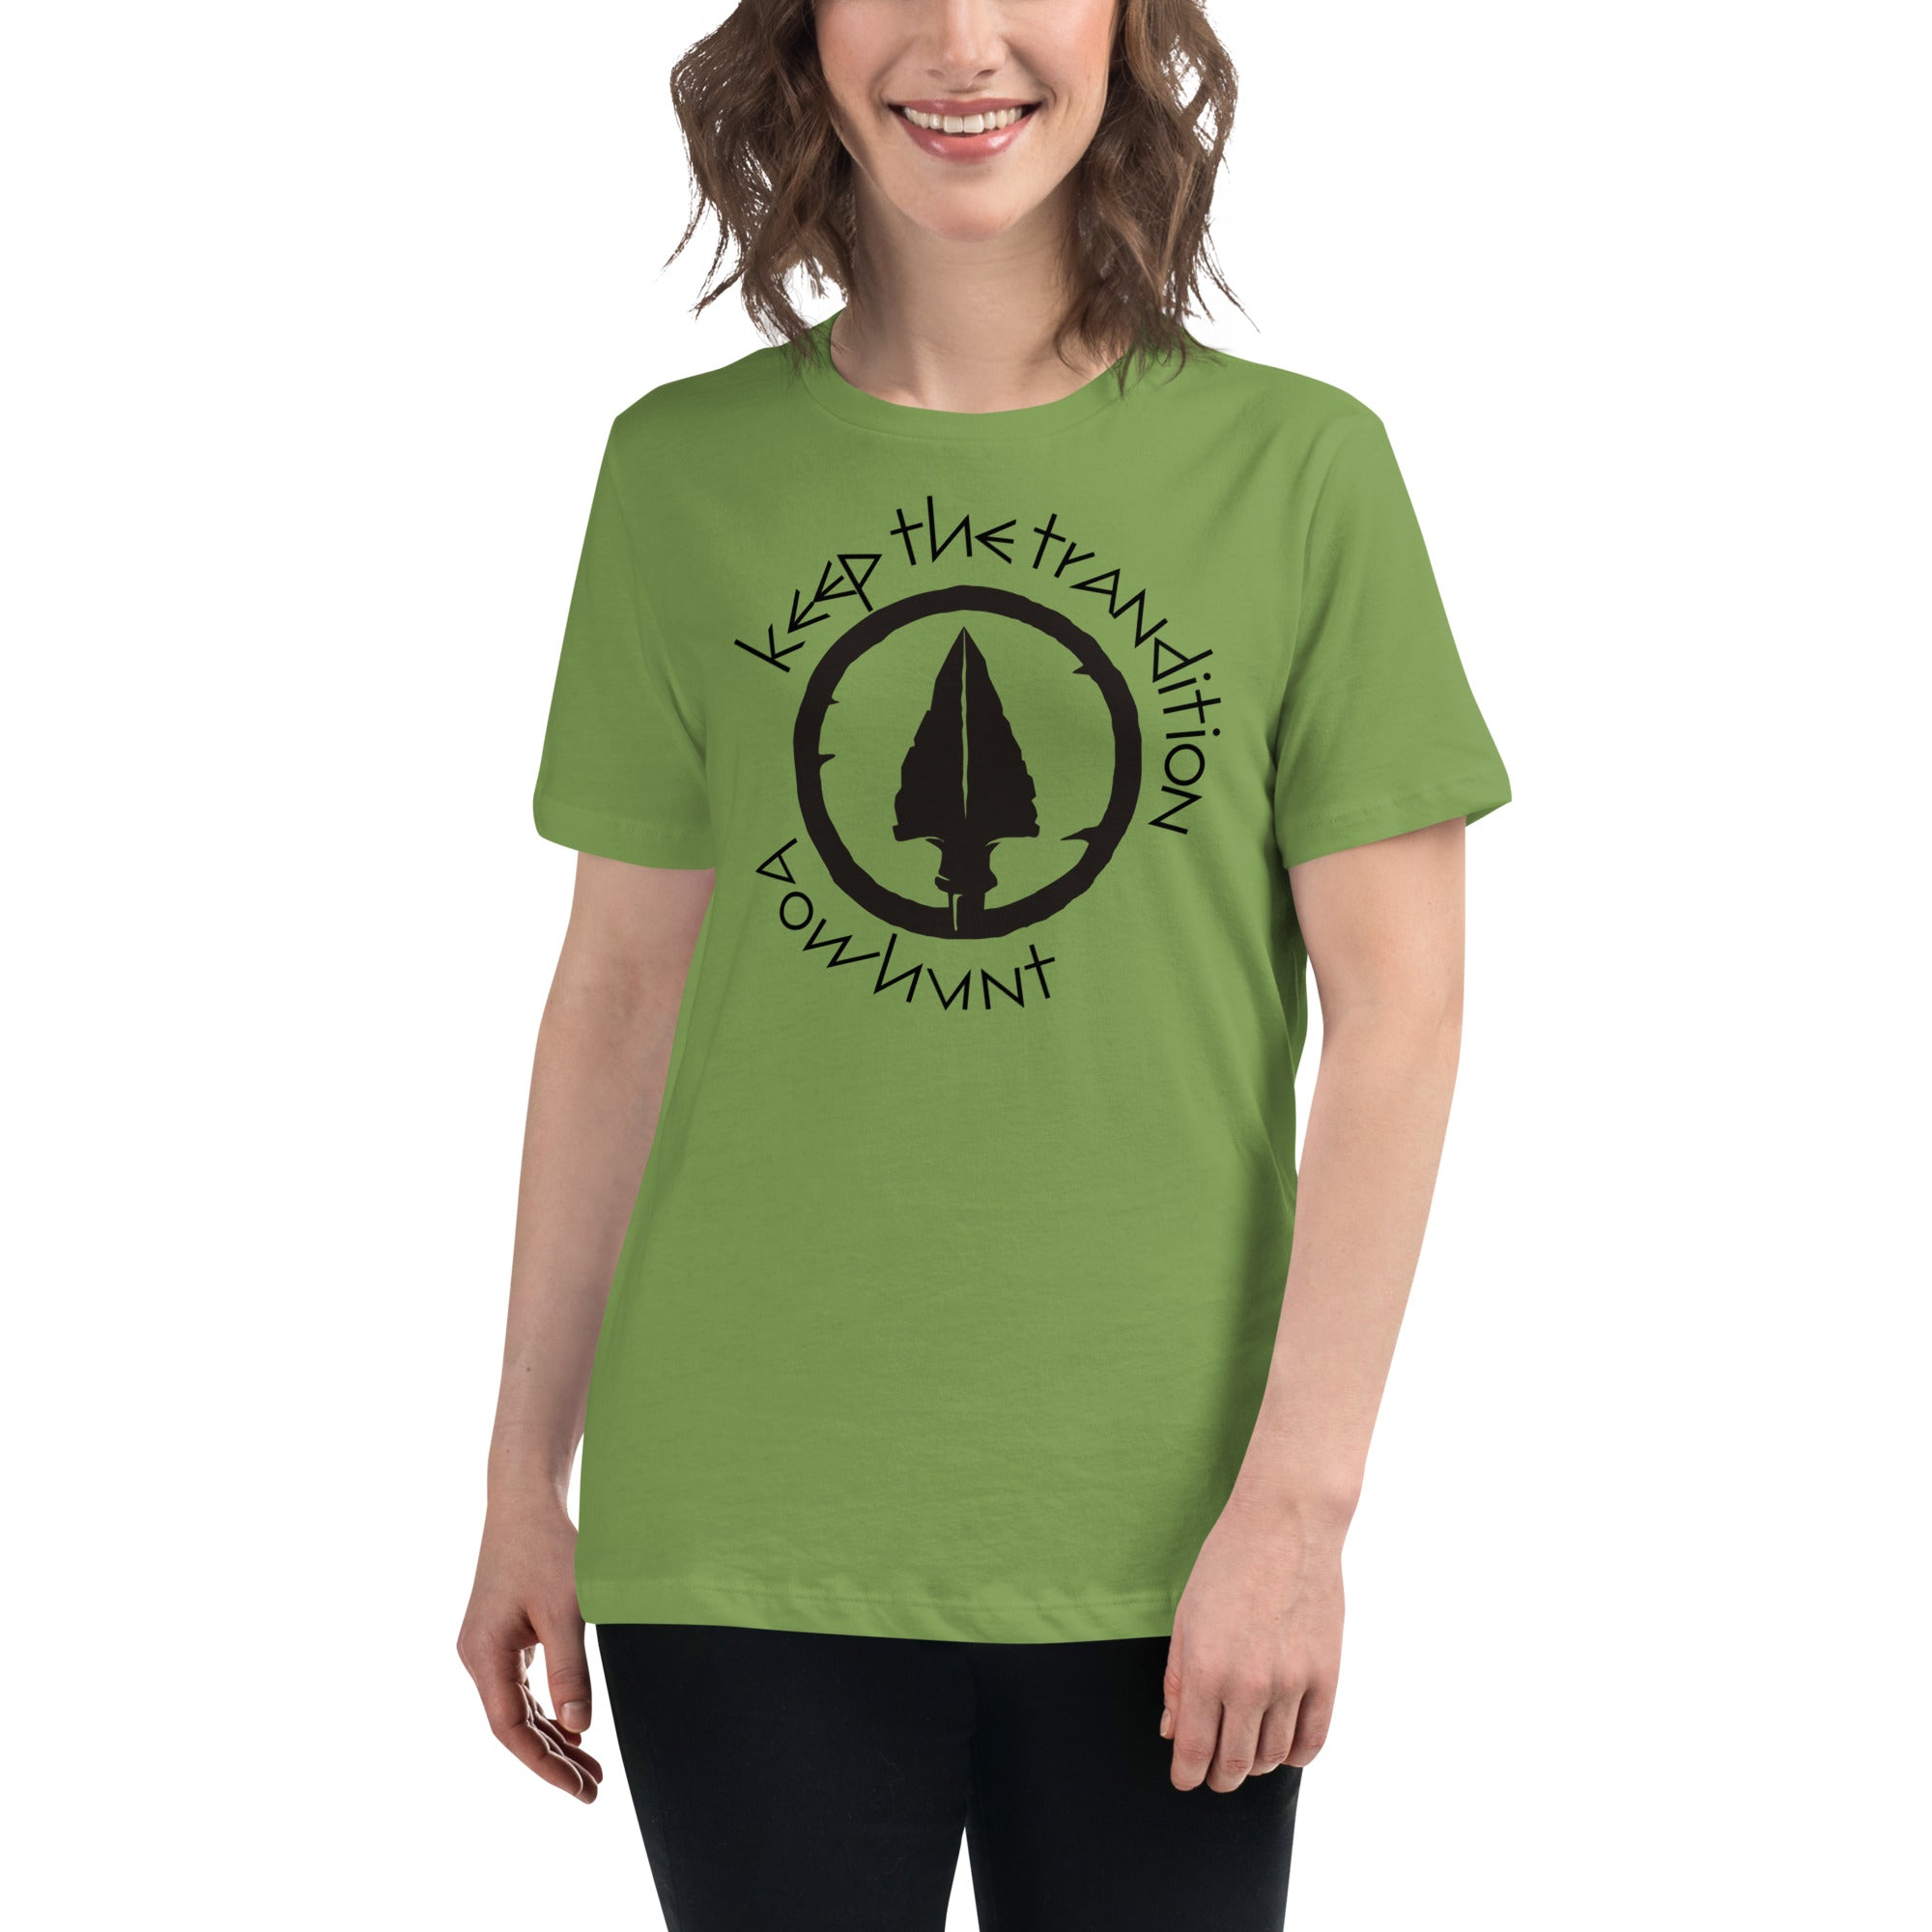 Keep The Tradition Women's Premium T-Shirt - Bow Hunt